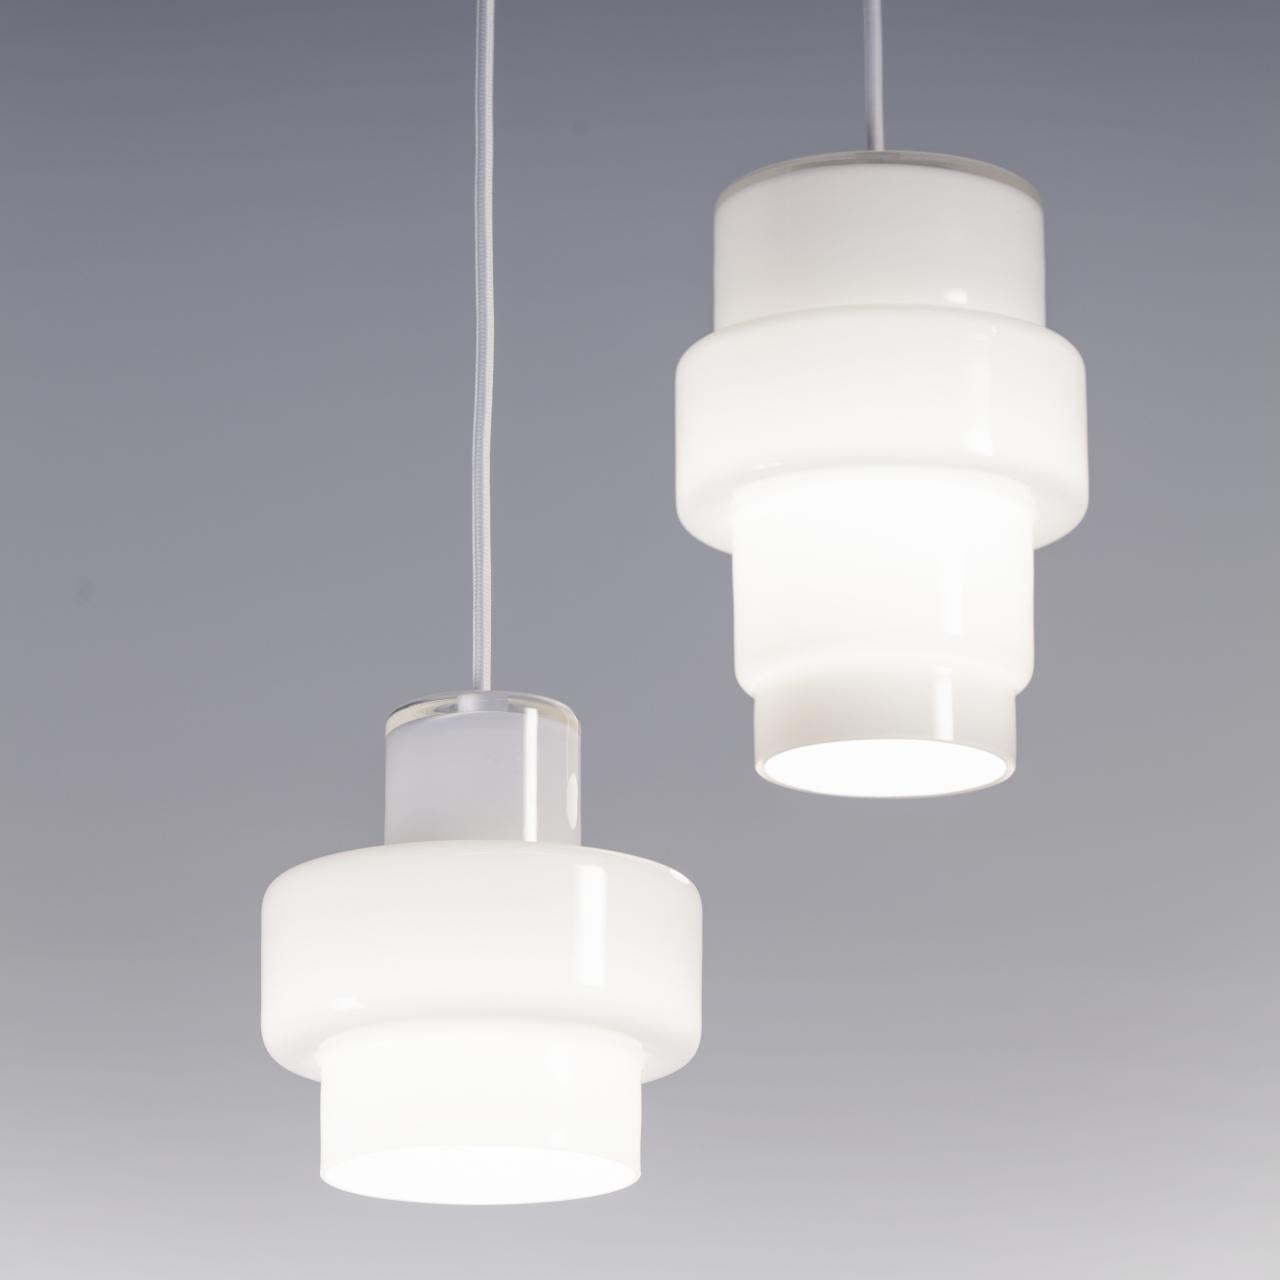 Blown Glass 'Multi S' Glass Pendant in White by Jokinen and Konu for Innolux For Sale